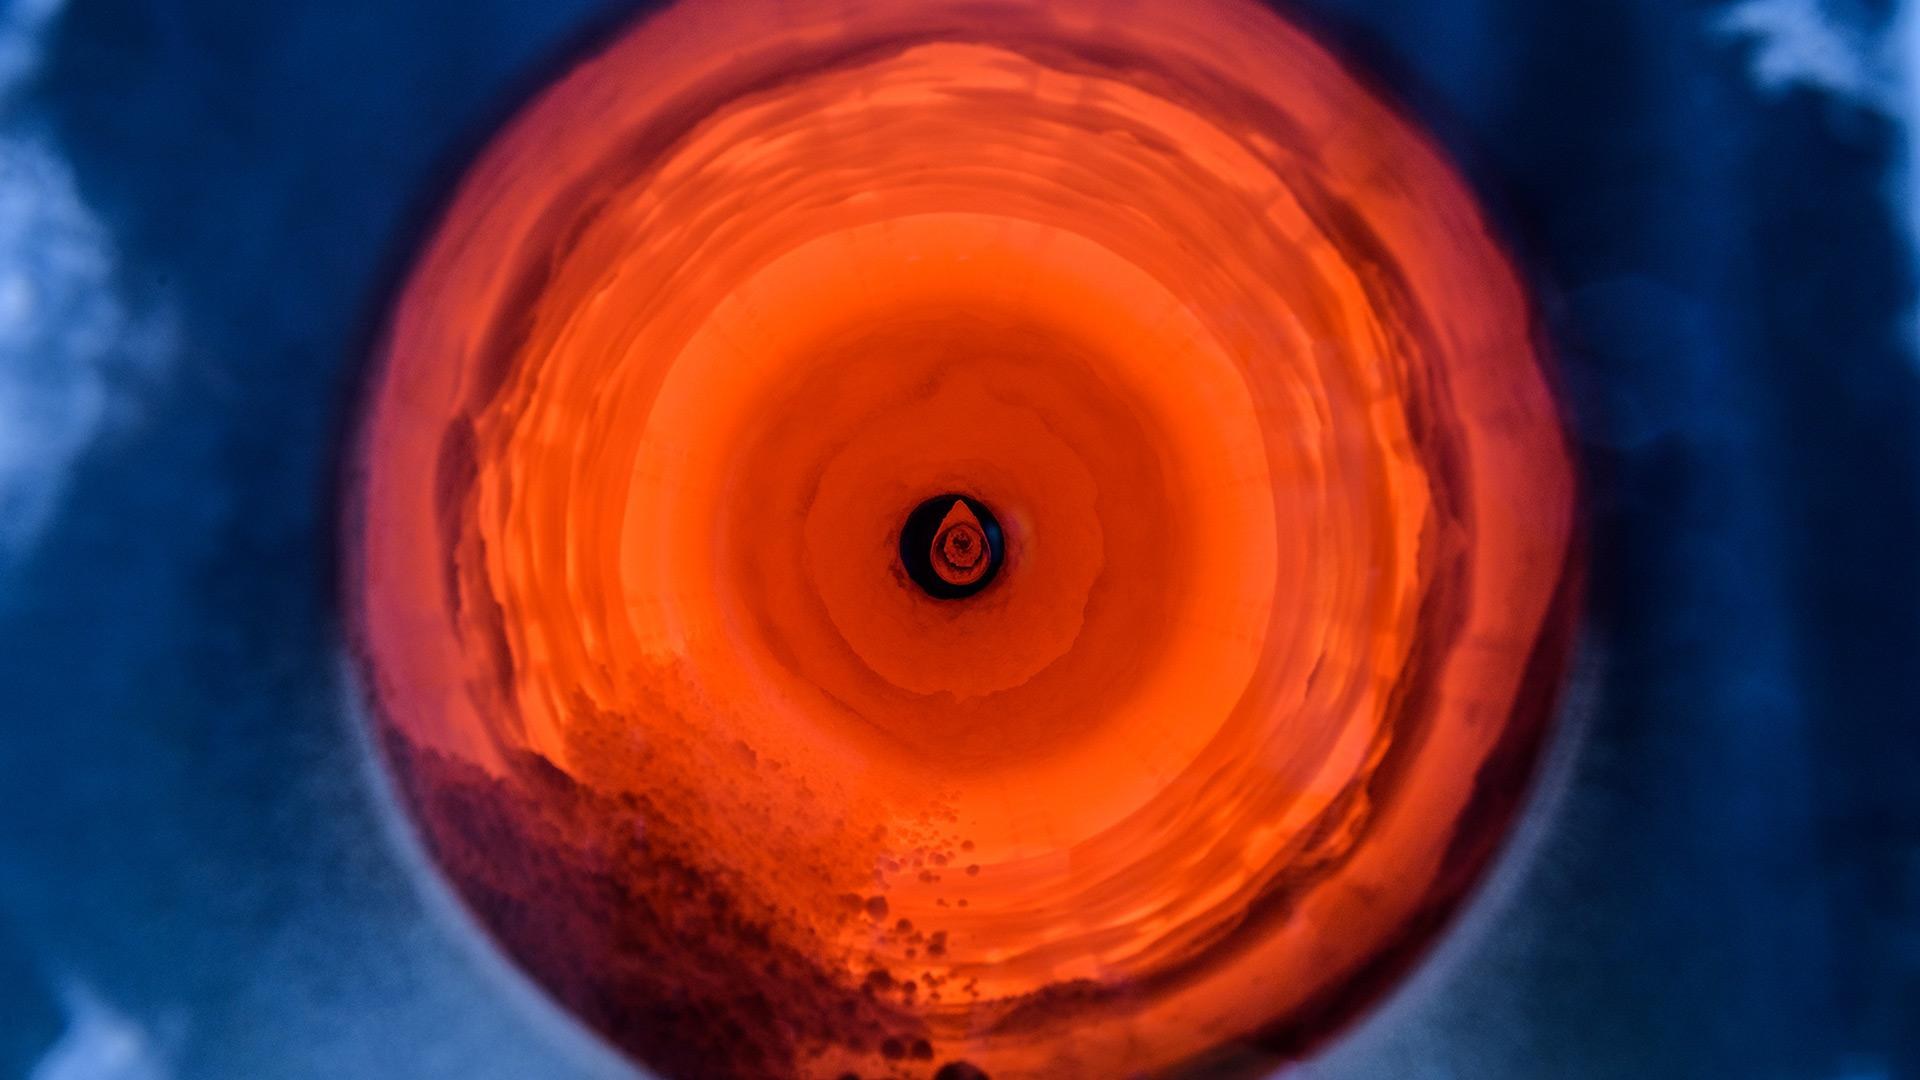 View of raw cement powder in the still-glowing rotary kiln.